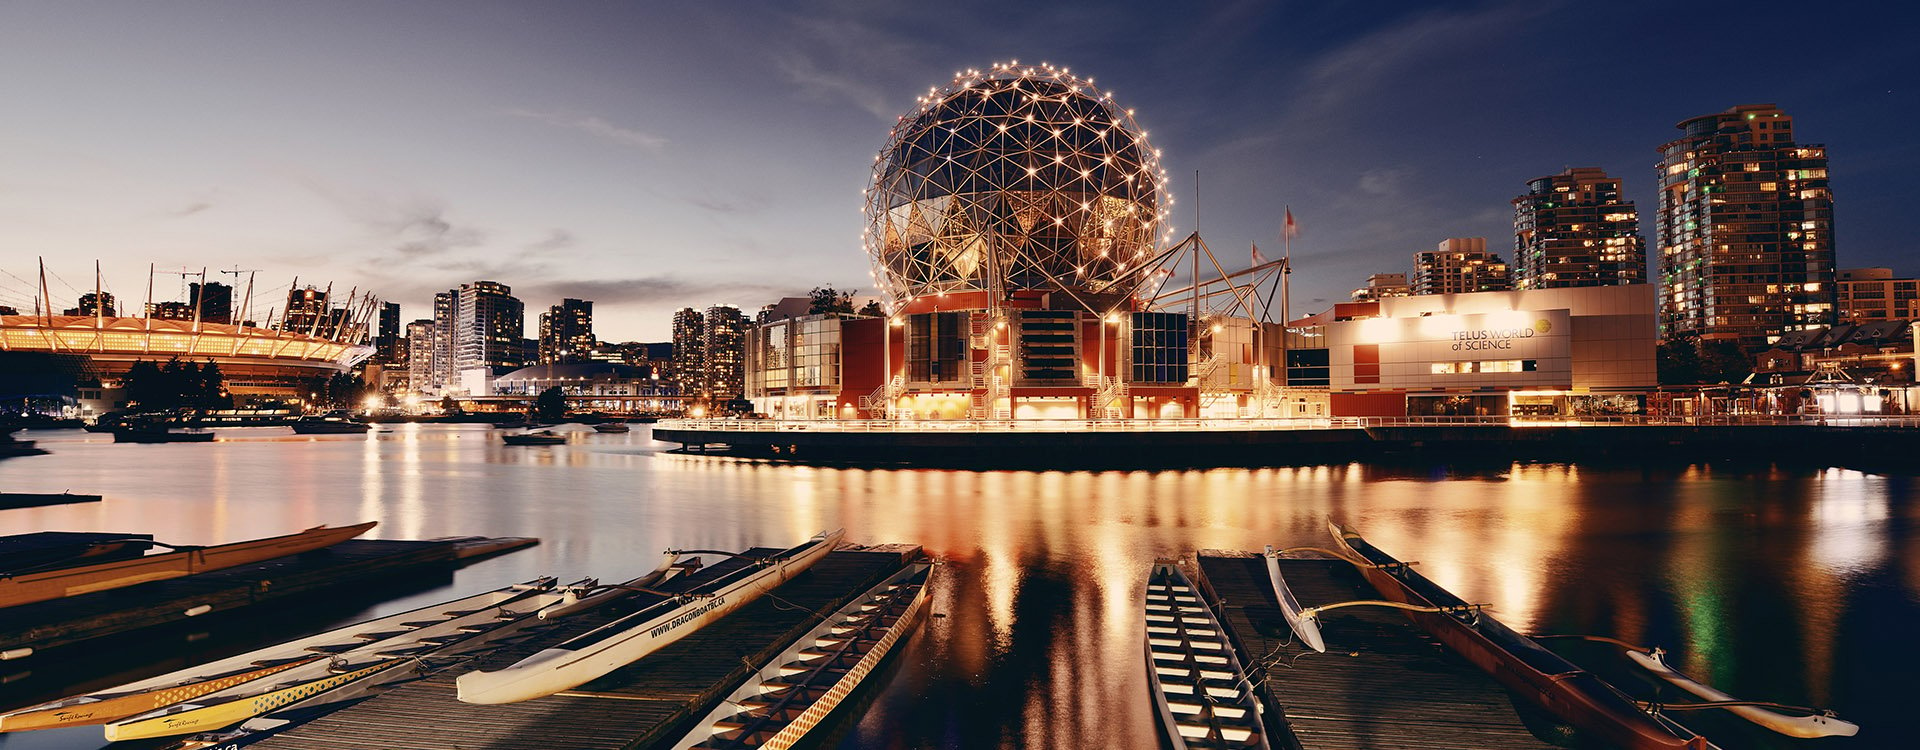 Science World waterfront of False Creek in Vancouver, Canada